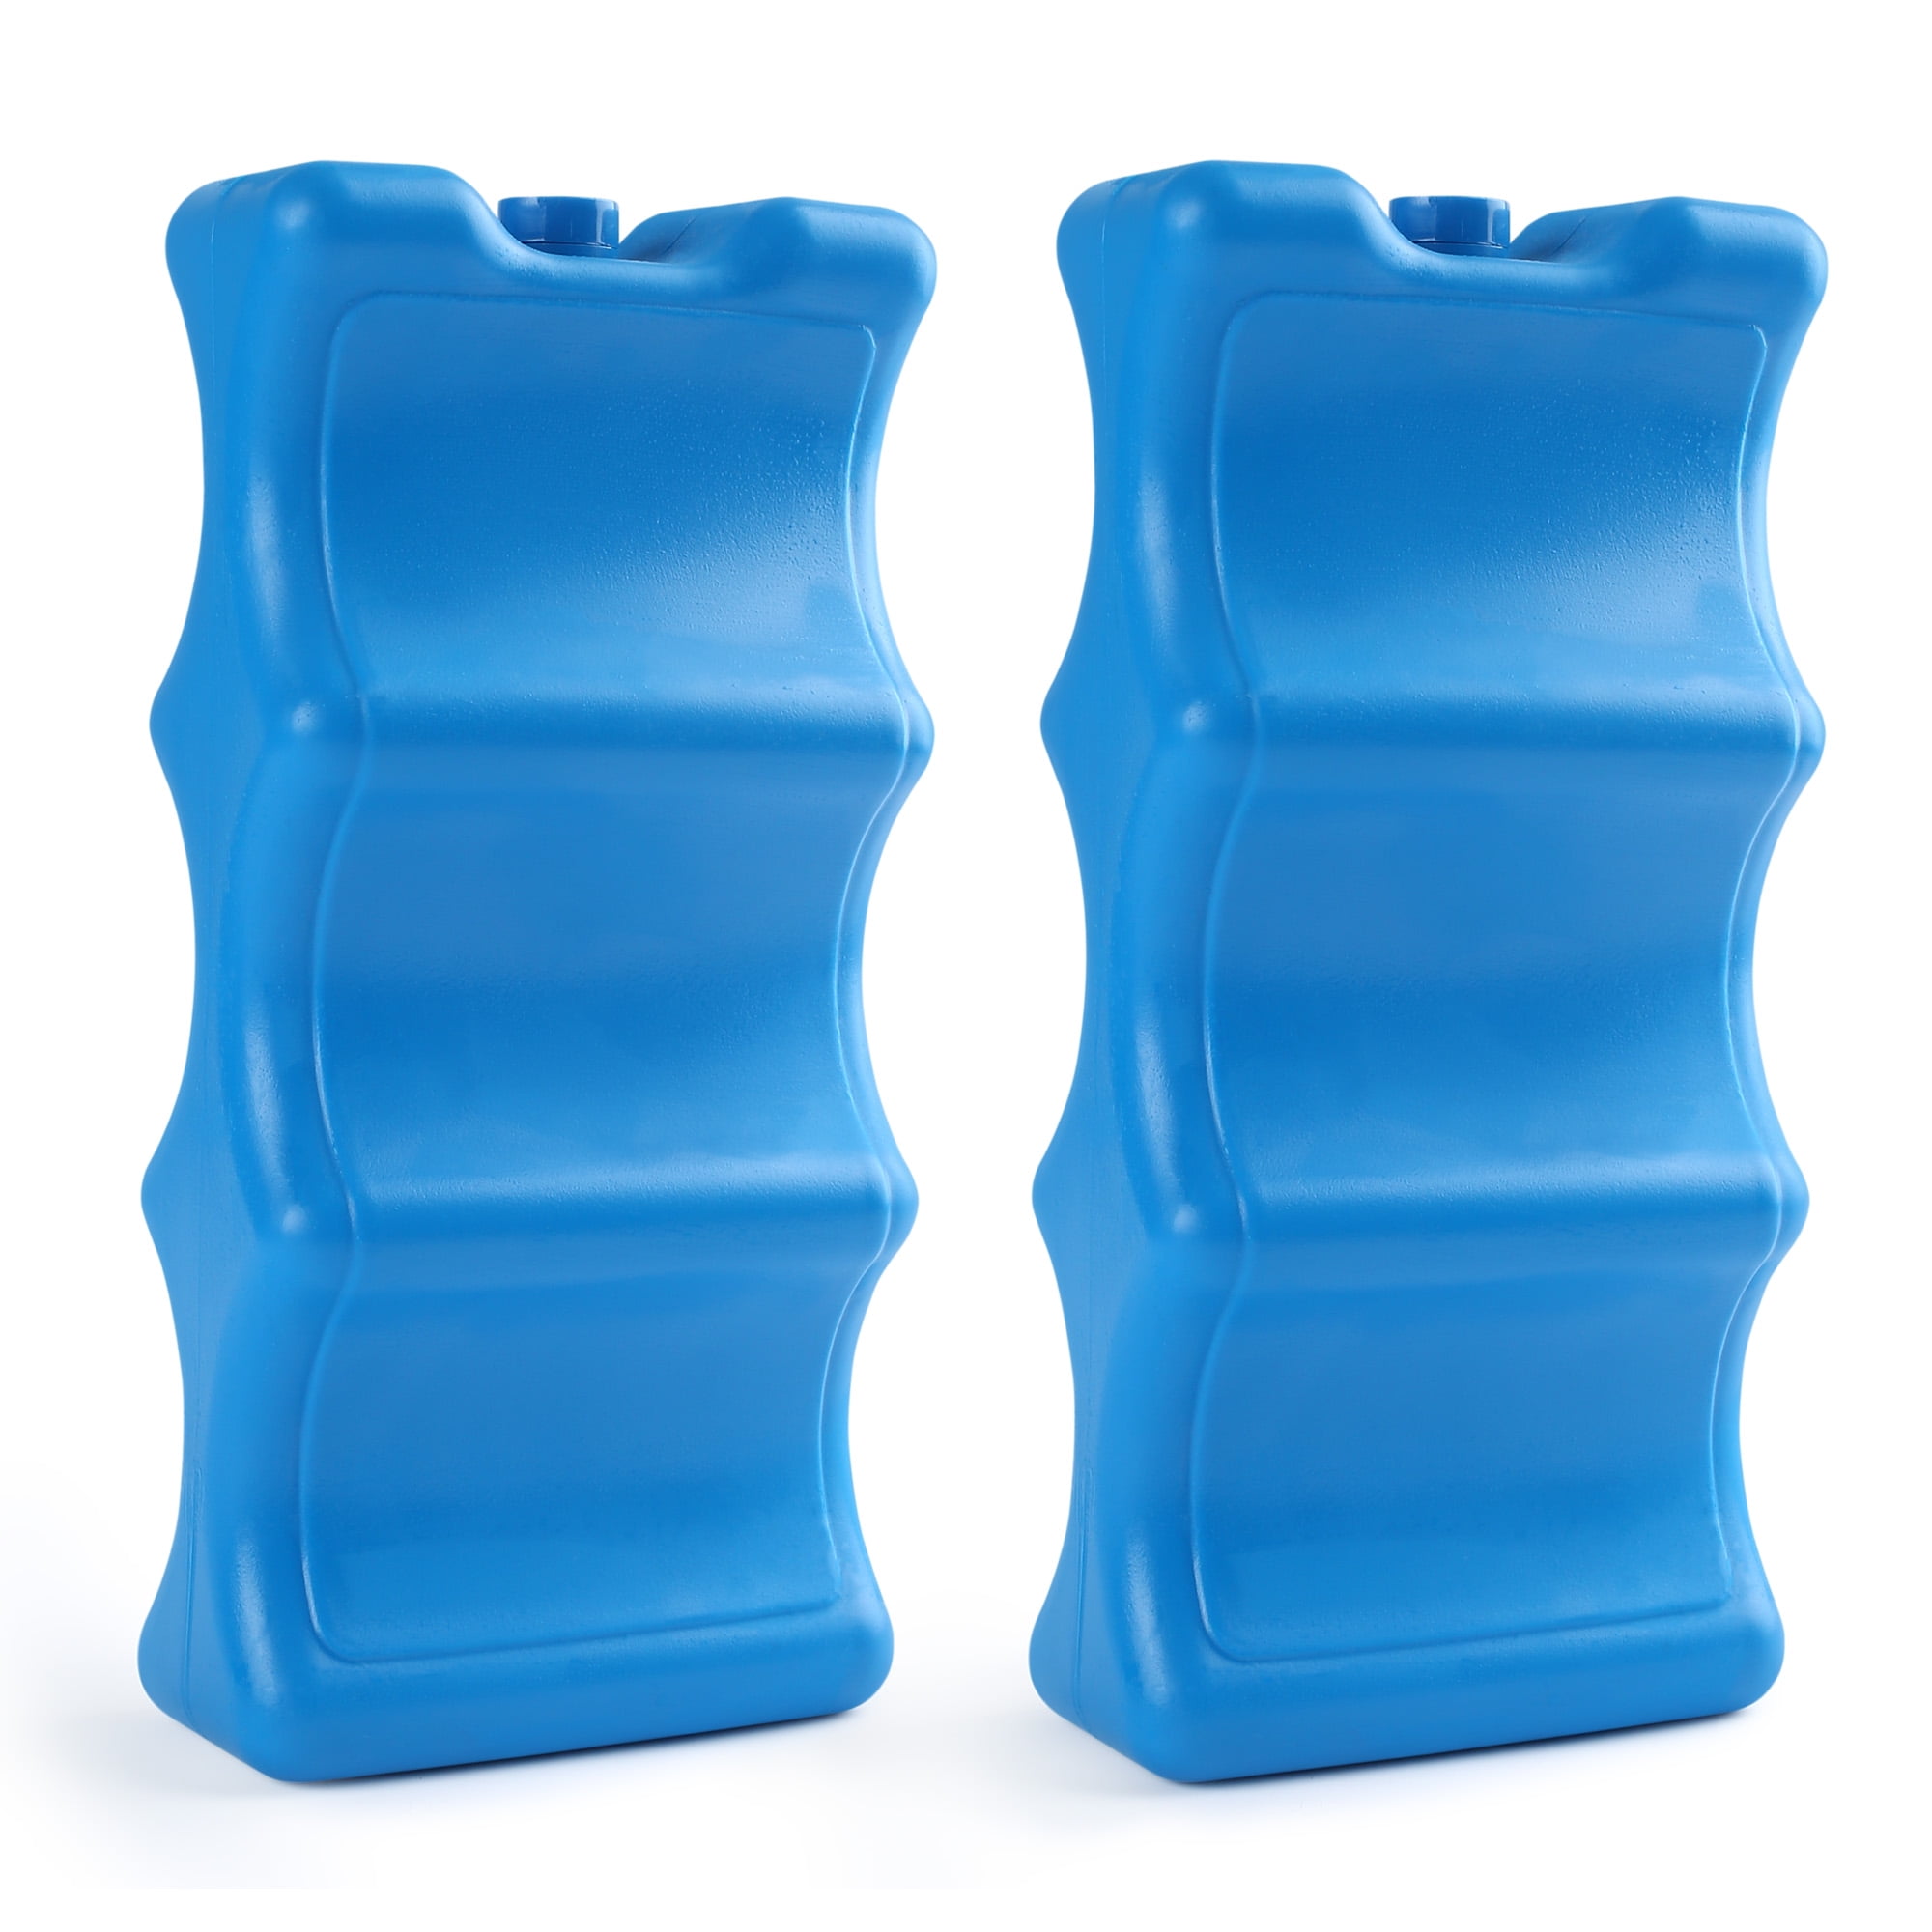 Long Lasting Ice Packs Resuable Freezer Packs Double-Sided Contoured Shaped Fits Around Breastmilk Bottles for Breast Milk Storage Can Coolers Lunch Box Keep Fresh 600ml Blue Double-Sided Contoured